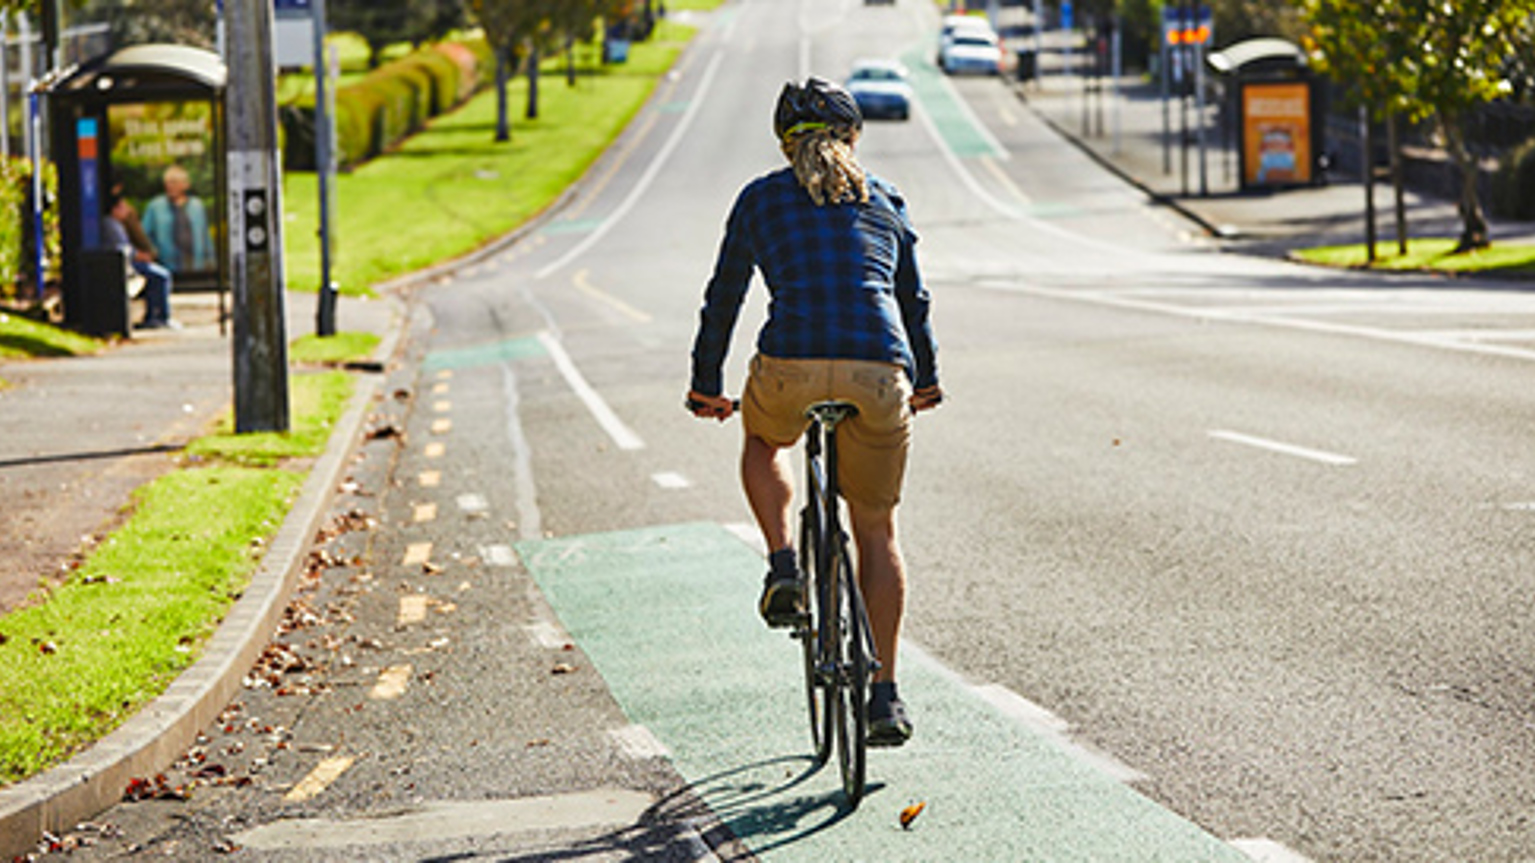 A cyclist rides a bike on a on-road cycle lane near the road kerb. There are no cars on the road.